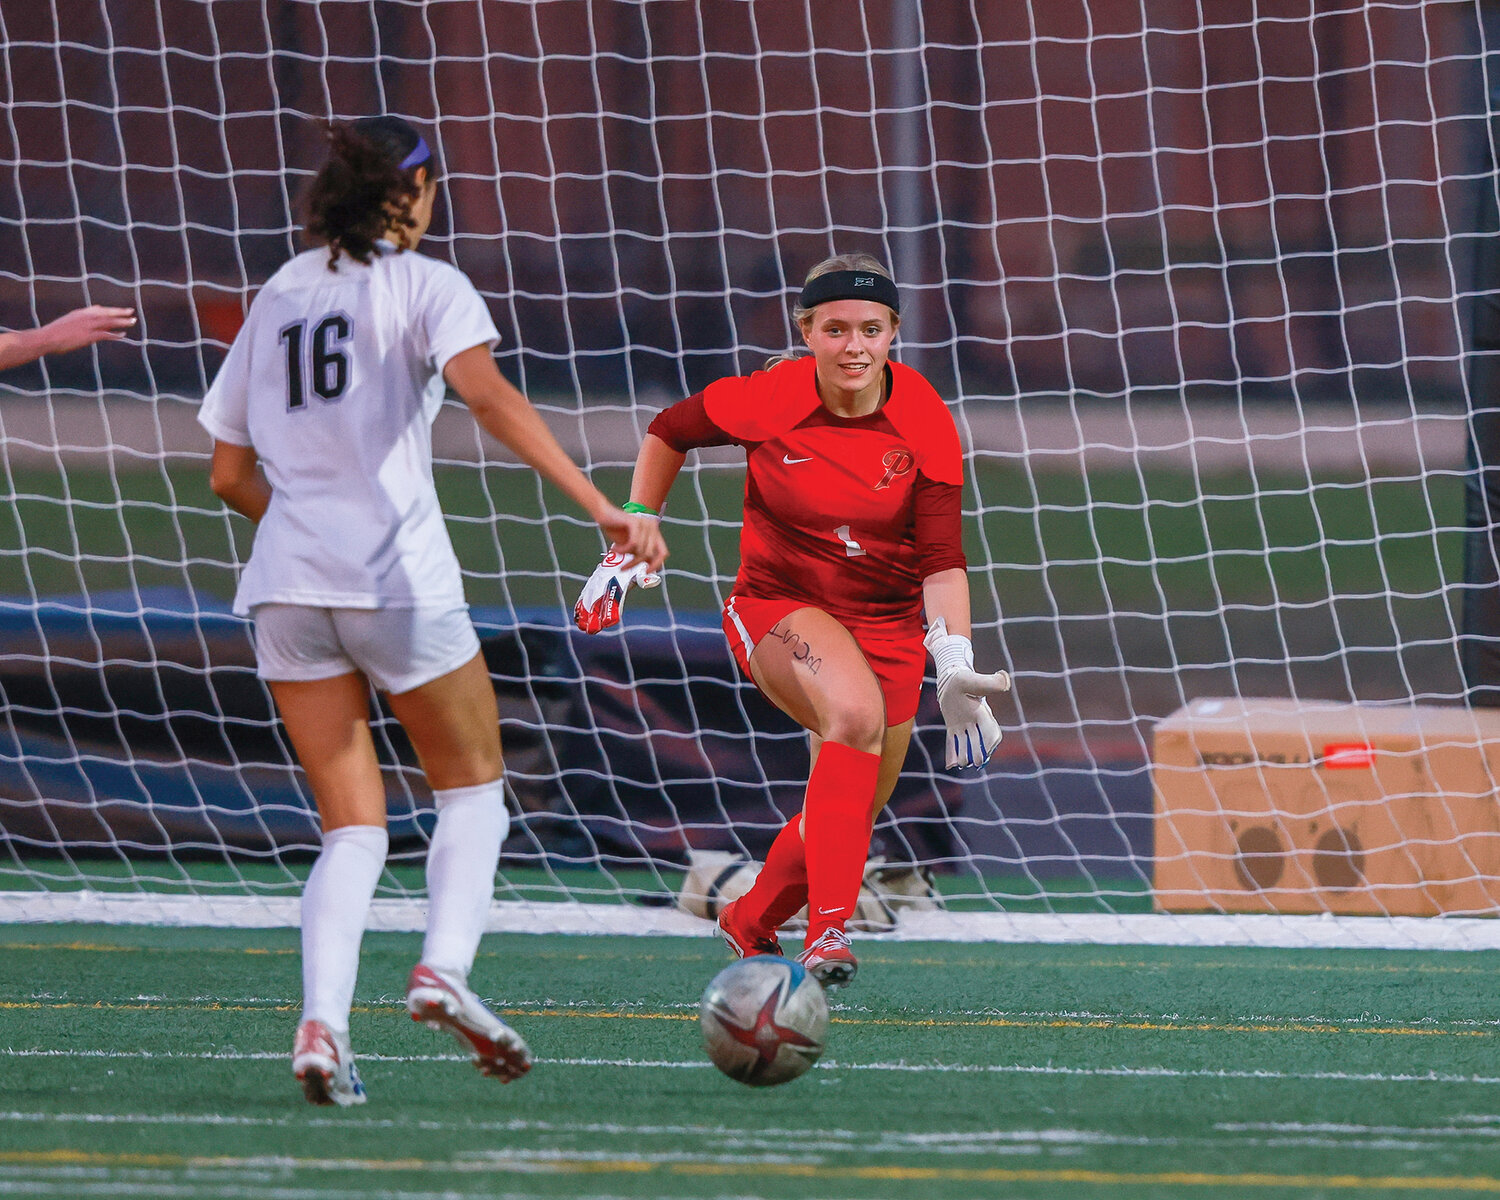 Prairie’s goalkeeper Lille Amies pushes forward on Heritage’s Kianna Tyler during the Timberwolves’ breakaway score in the first half of the Falcons’ 9-2 victory over Heritage High School on Thursday, Sept. 21.